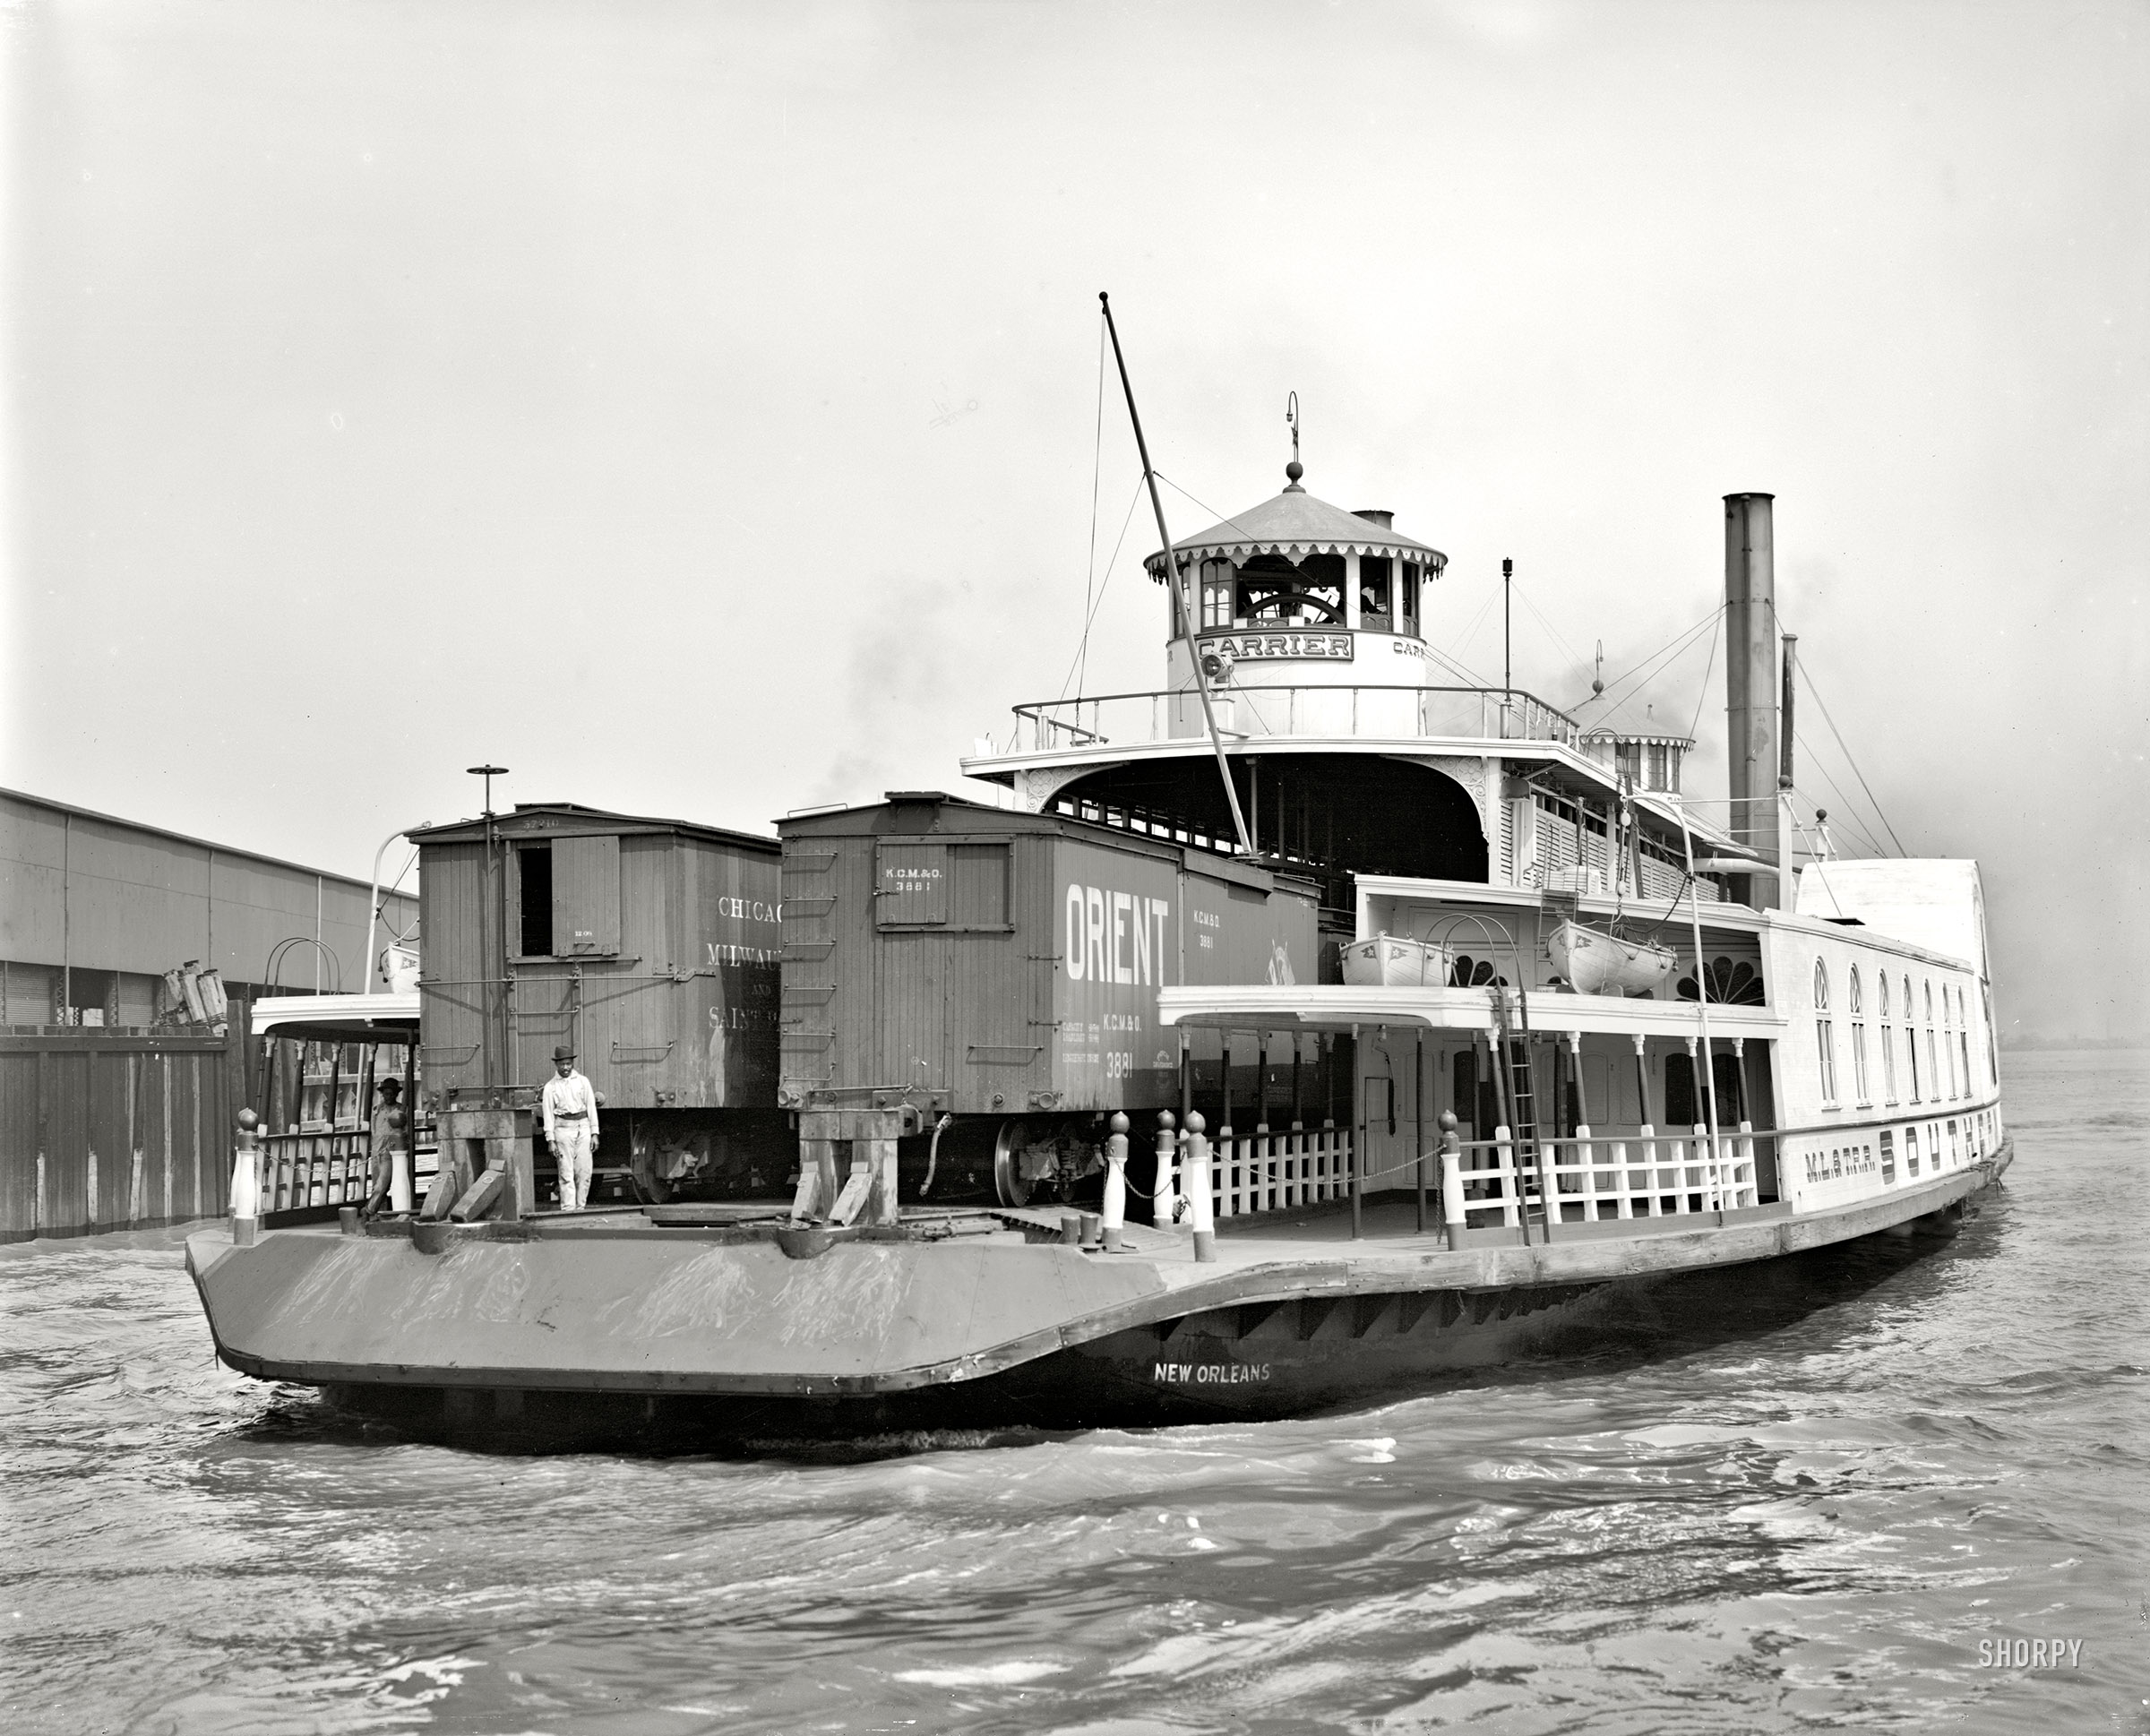 Circa 1910. "Southern Pacific R.R. transfer boat Carrier at New Orleans." 8x10 inch dry plate glass negative, Detroit Publishing Company. View full size.